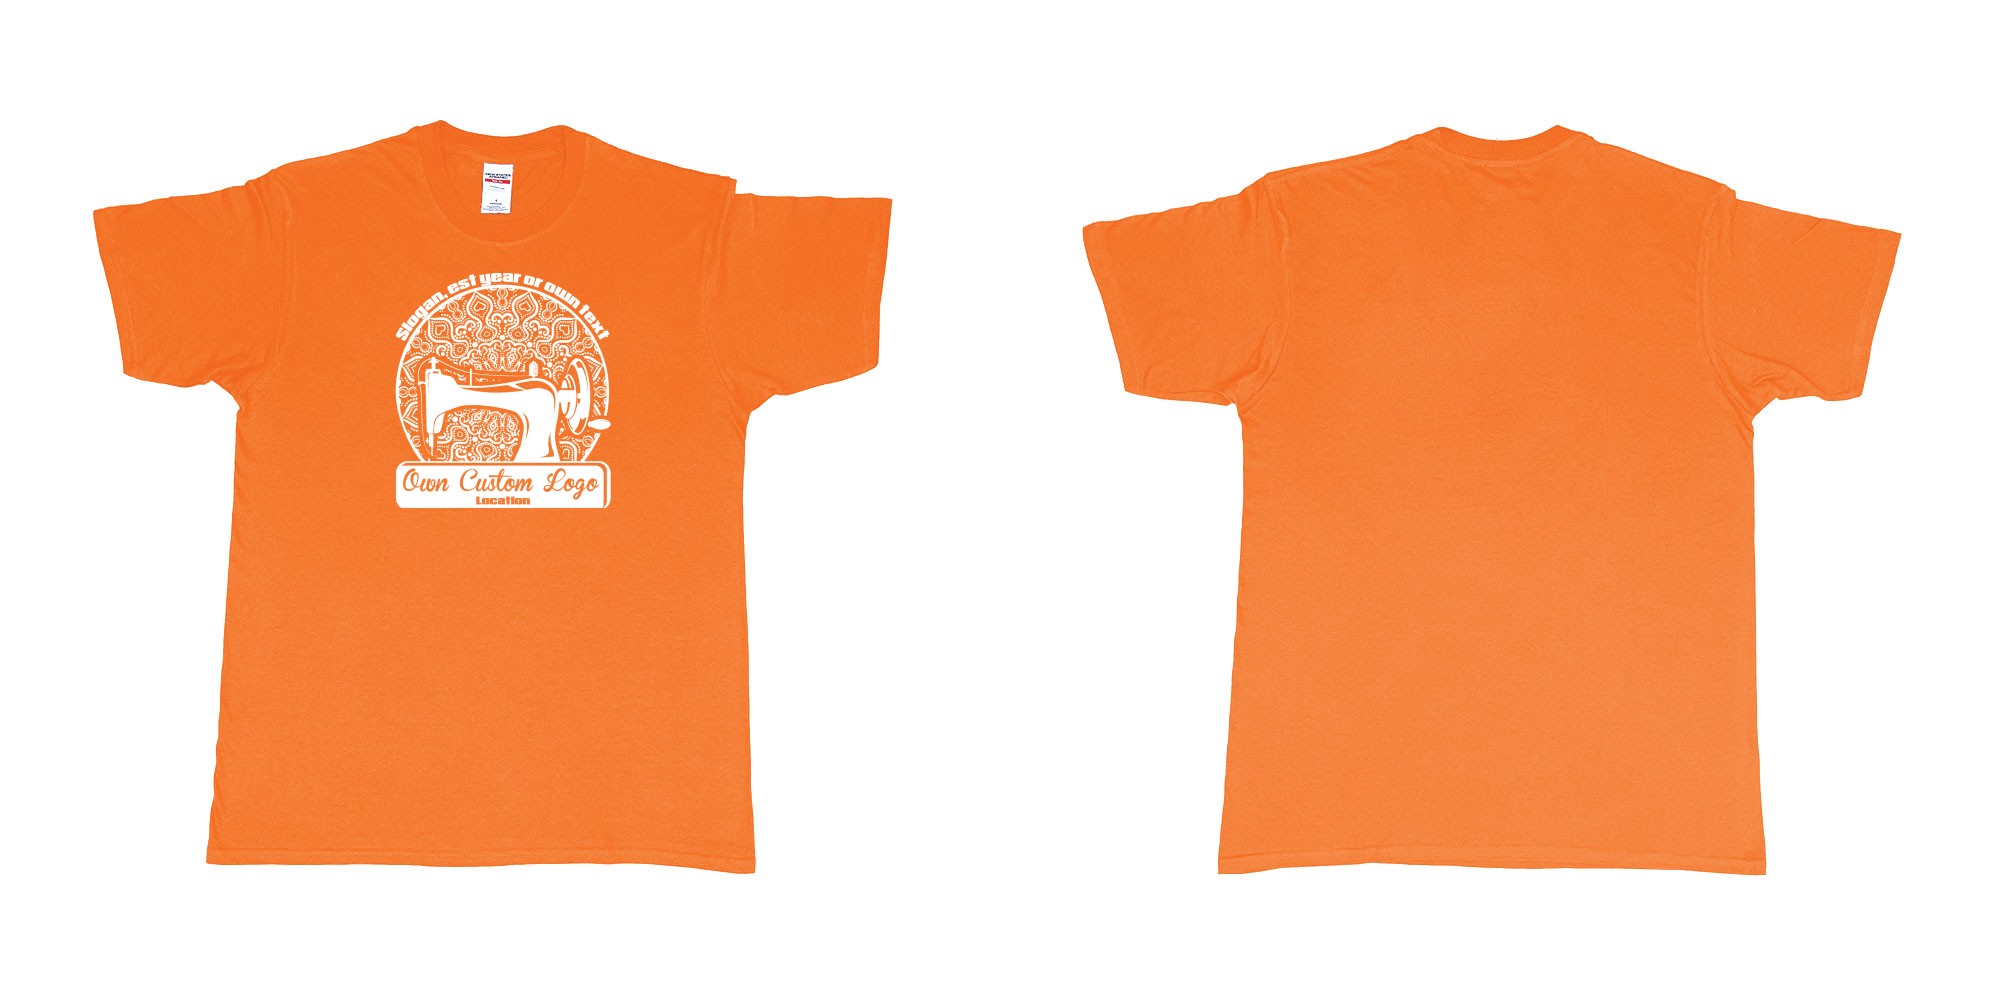 Custom tshirt design sewing machine in fabric color orange choice your own text made in Bali by The Pirate Way